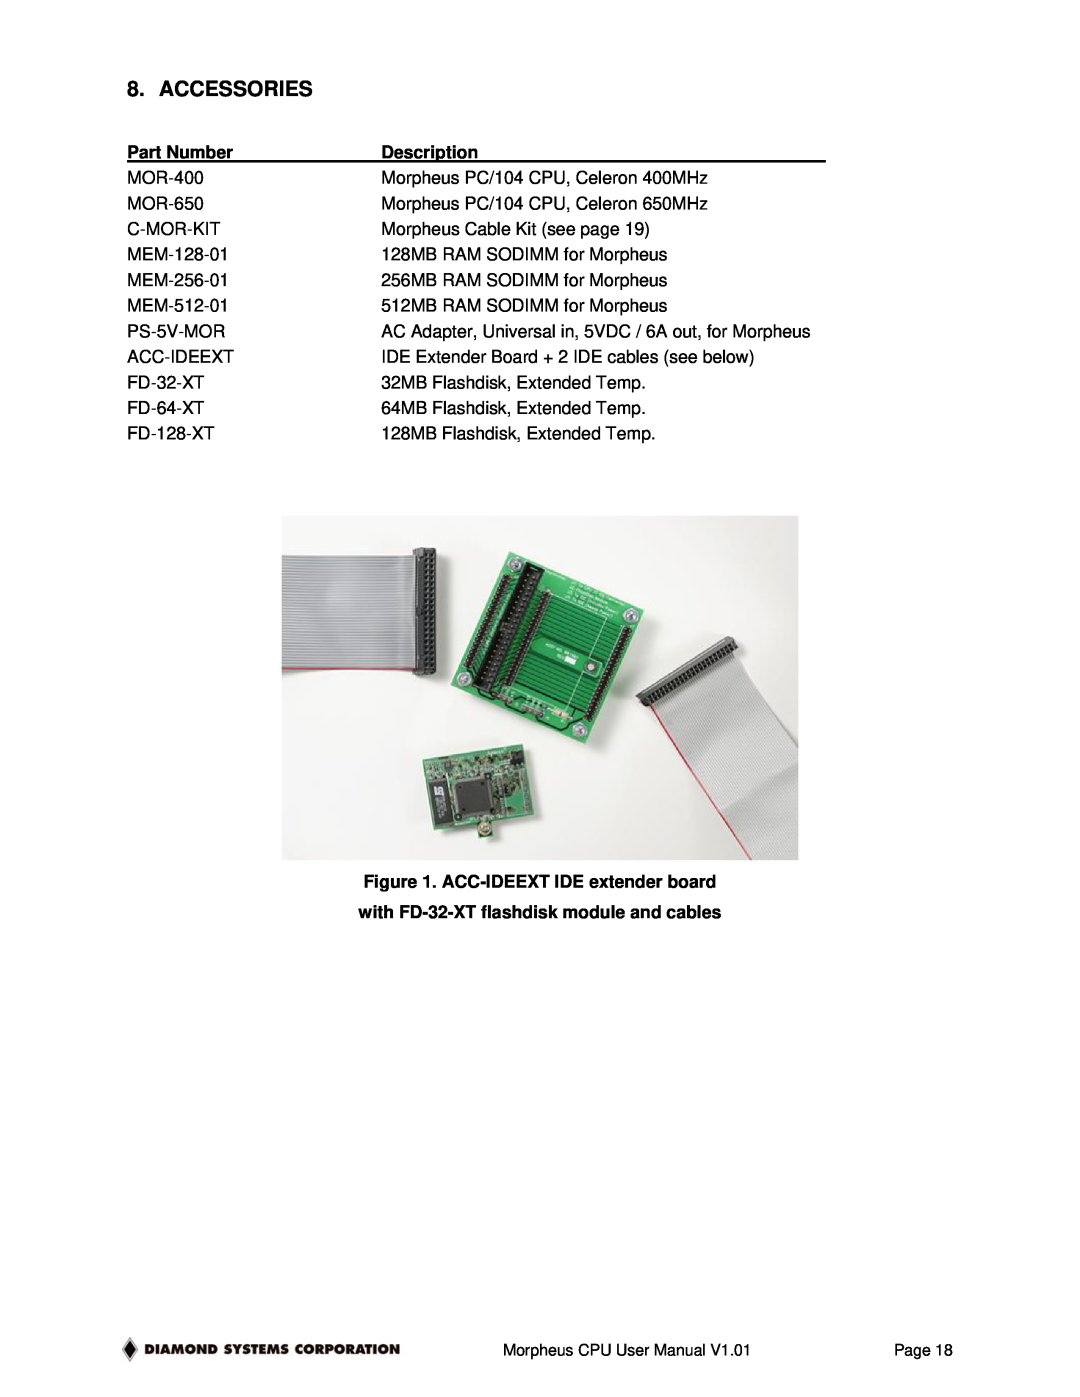 Diamond Systems 1.01, High INtegration PC/104 Celeron CPU with Ethernet user manual Accessories, Part Number, Description 